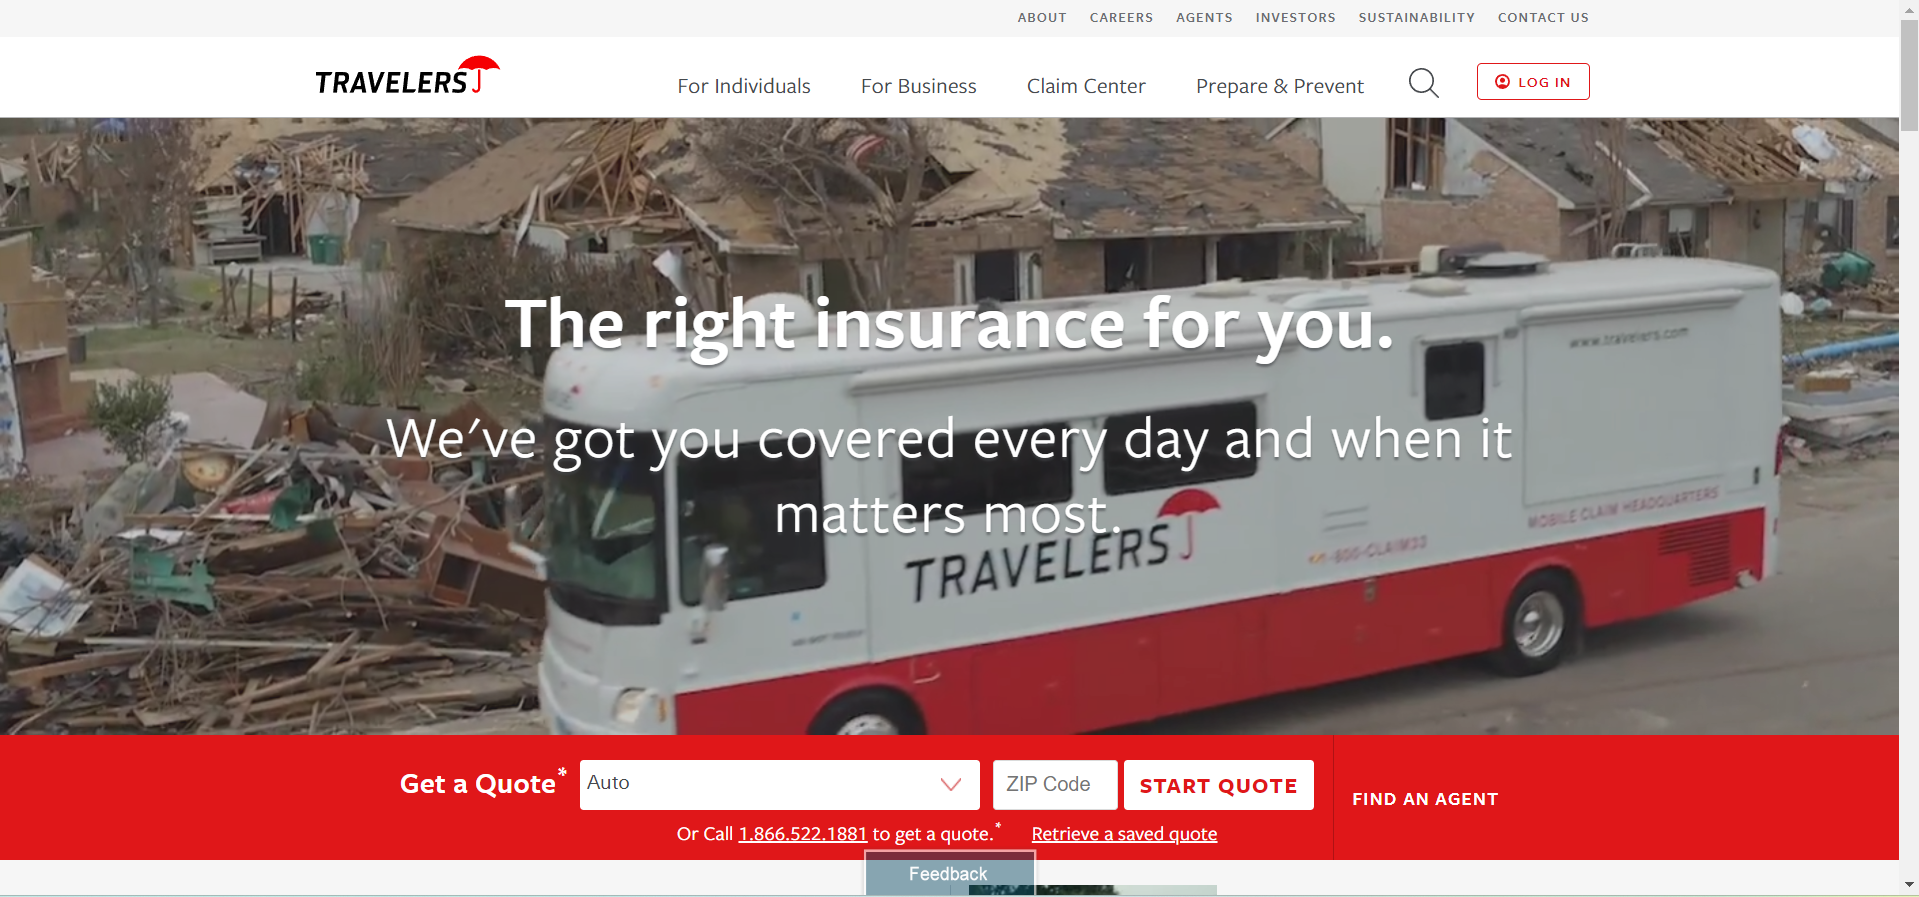 Travelers: Best Business Insurance for Event Planners